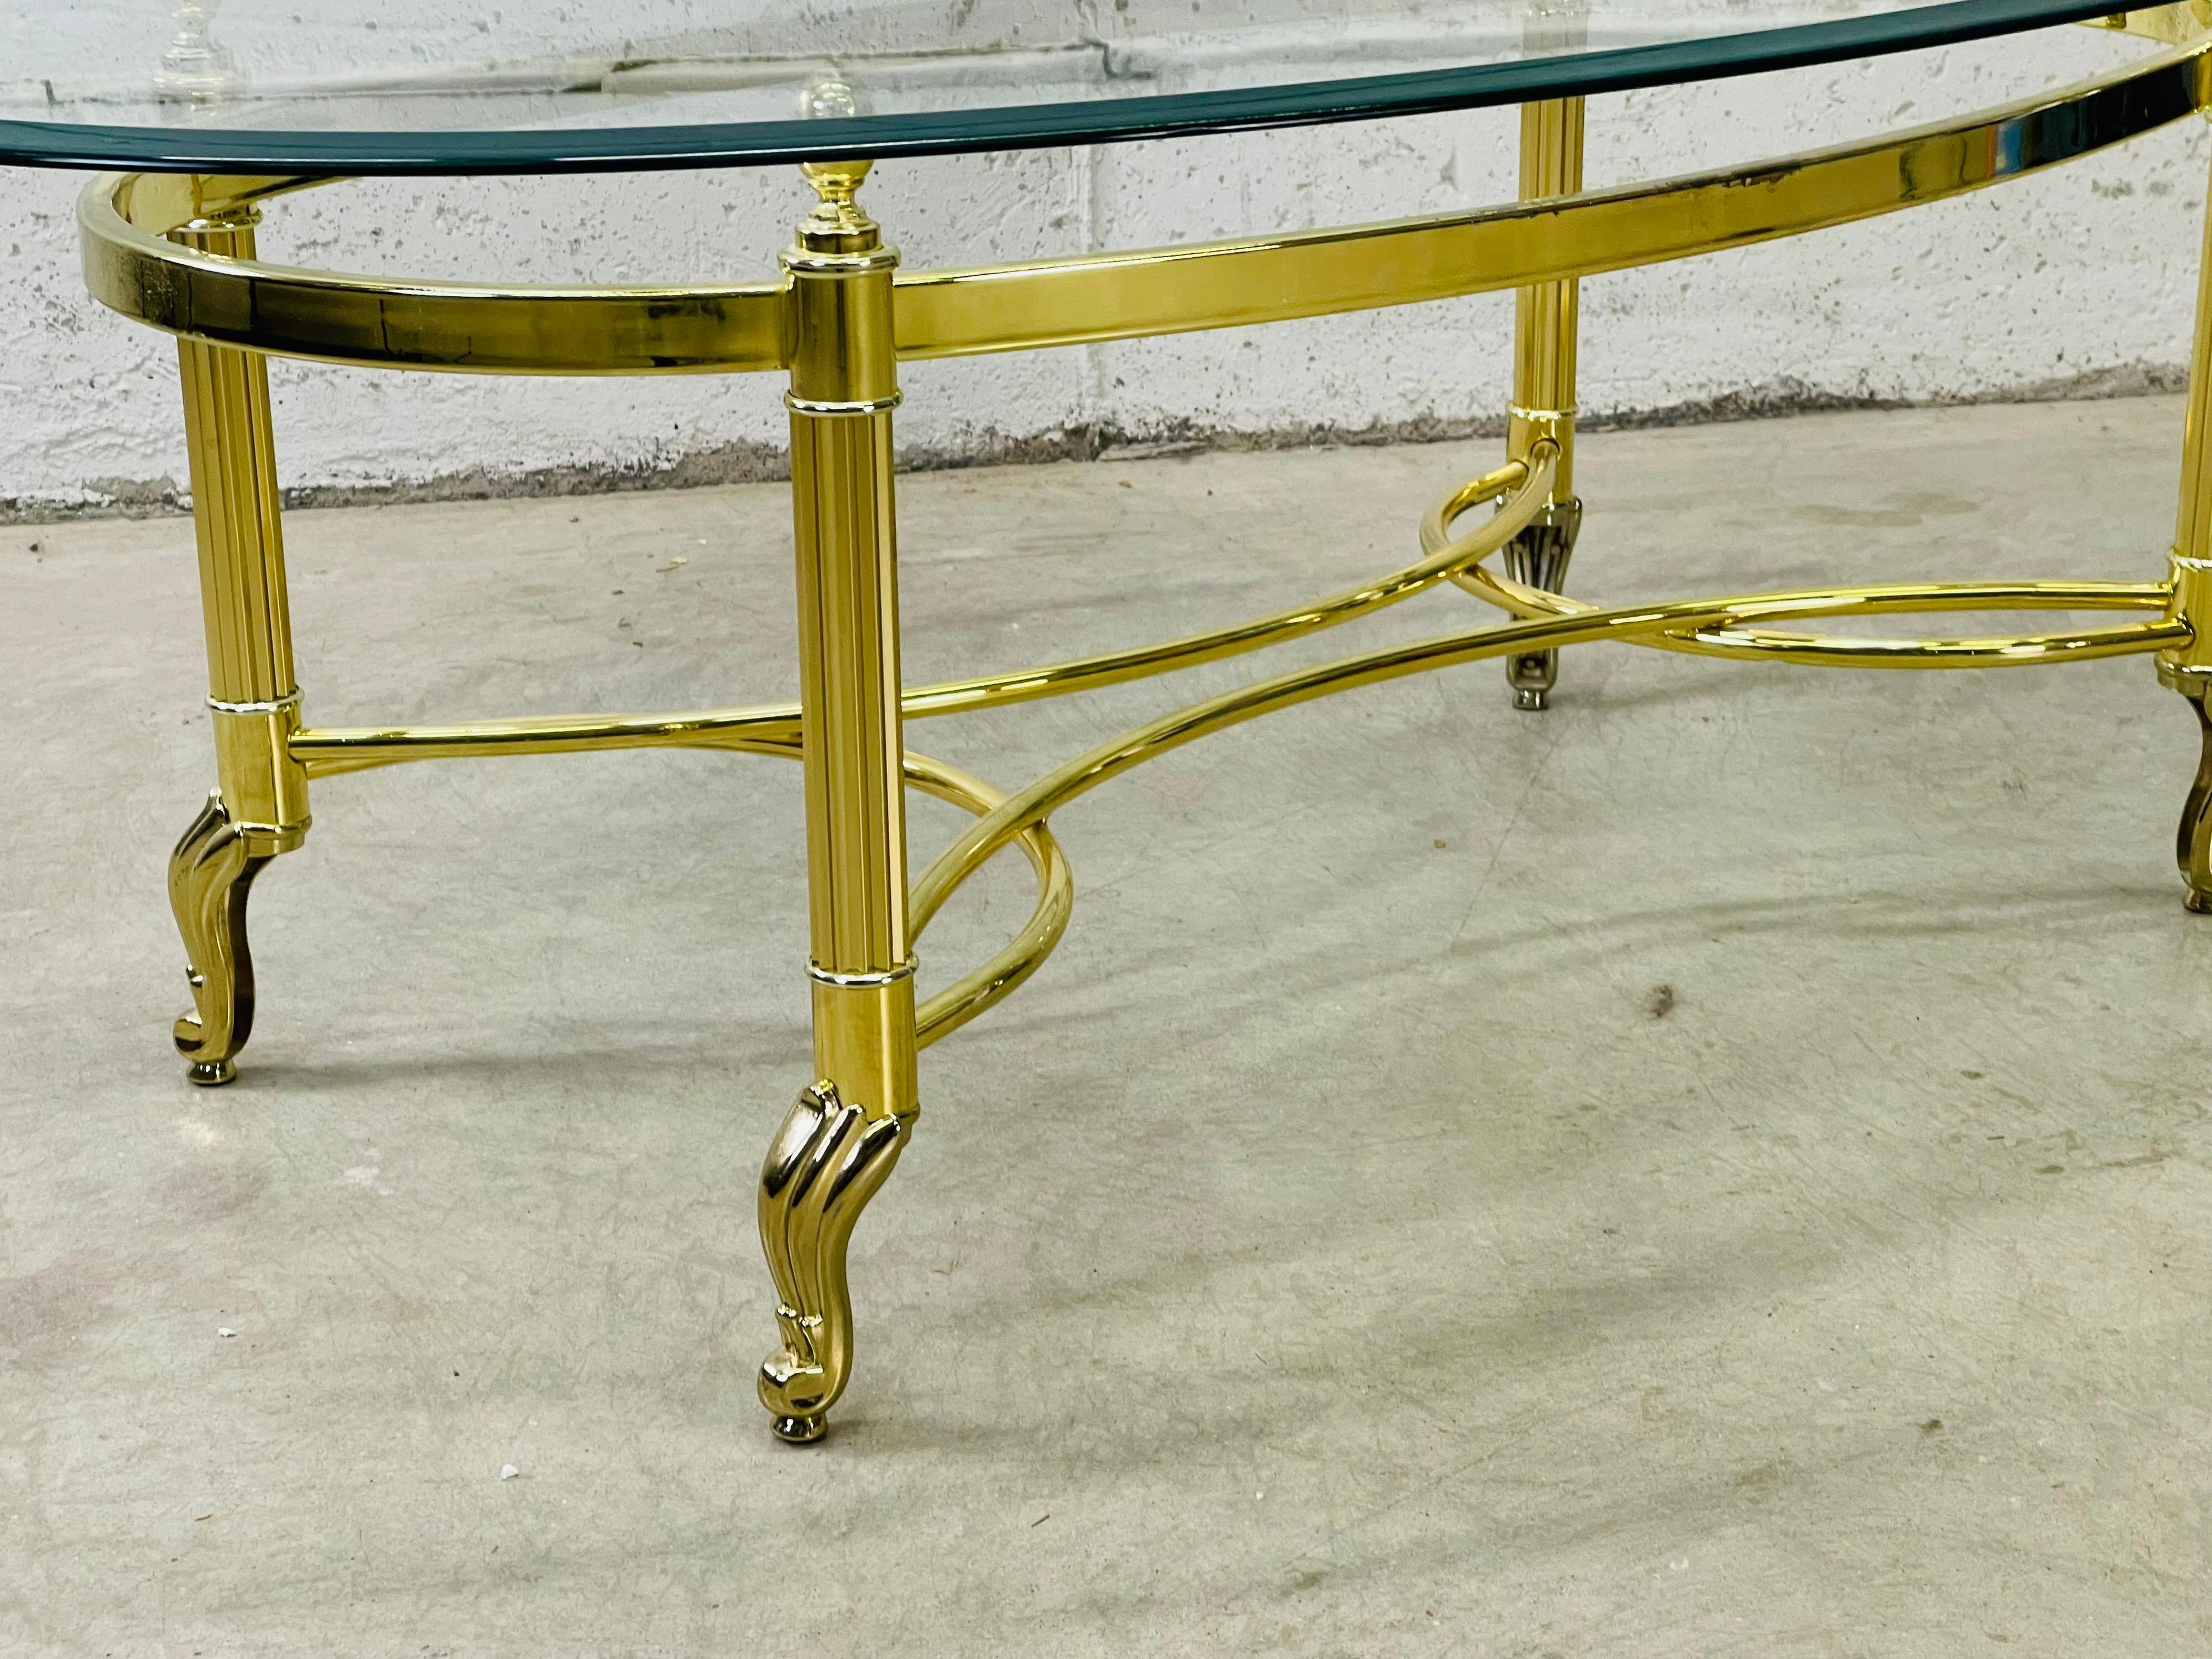 1960s Oval Glass Top Coffee Table In Good Condition For Sale In Amherst, NH